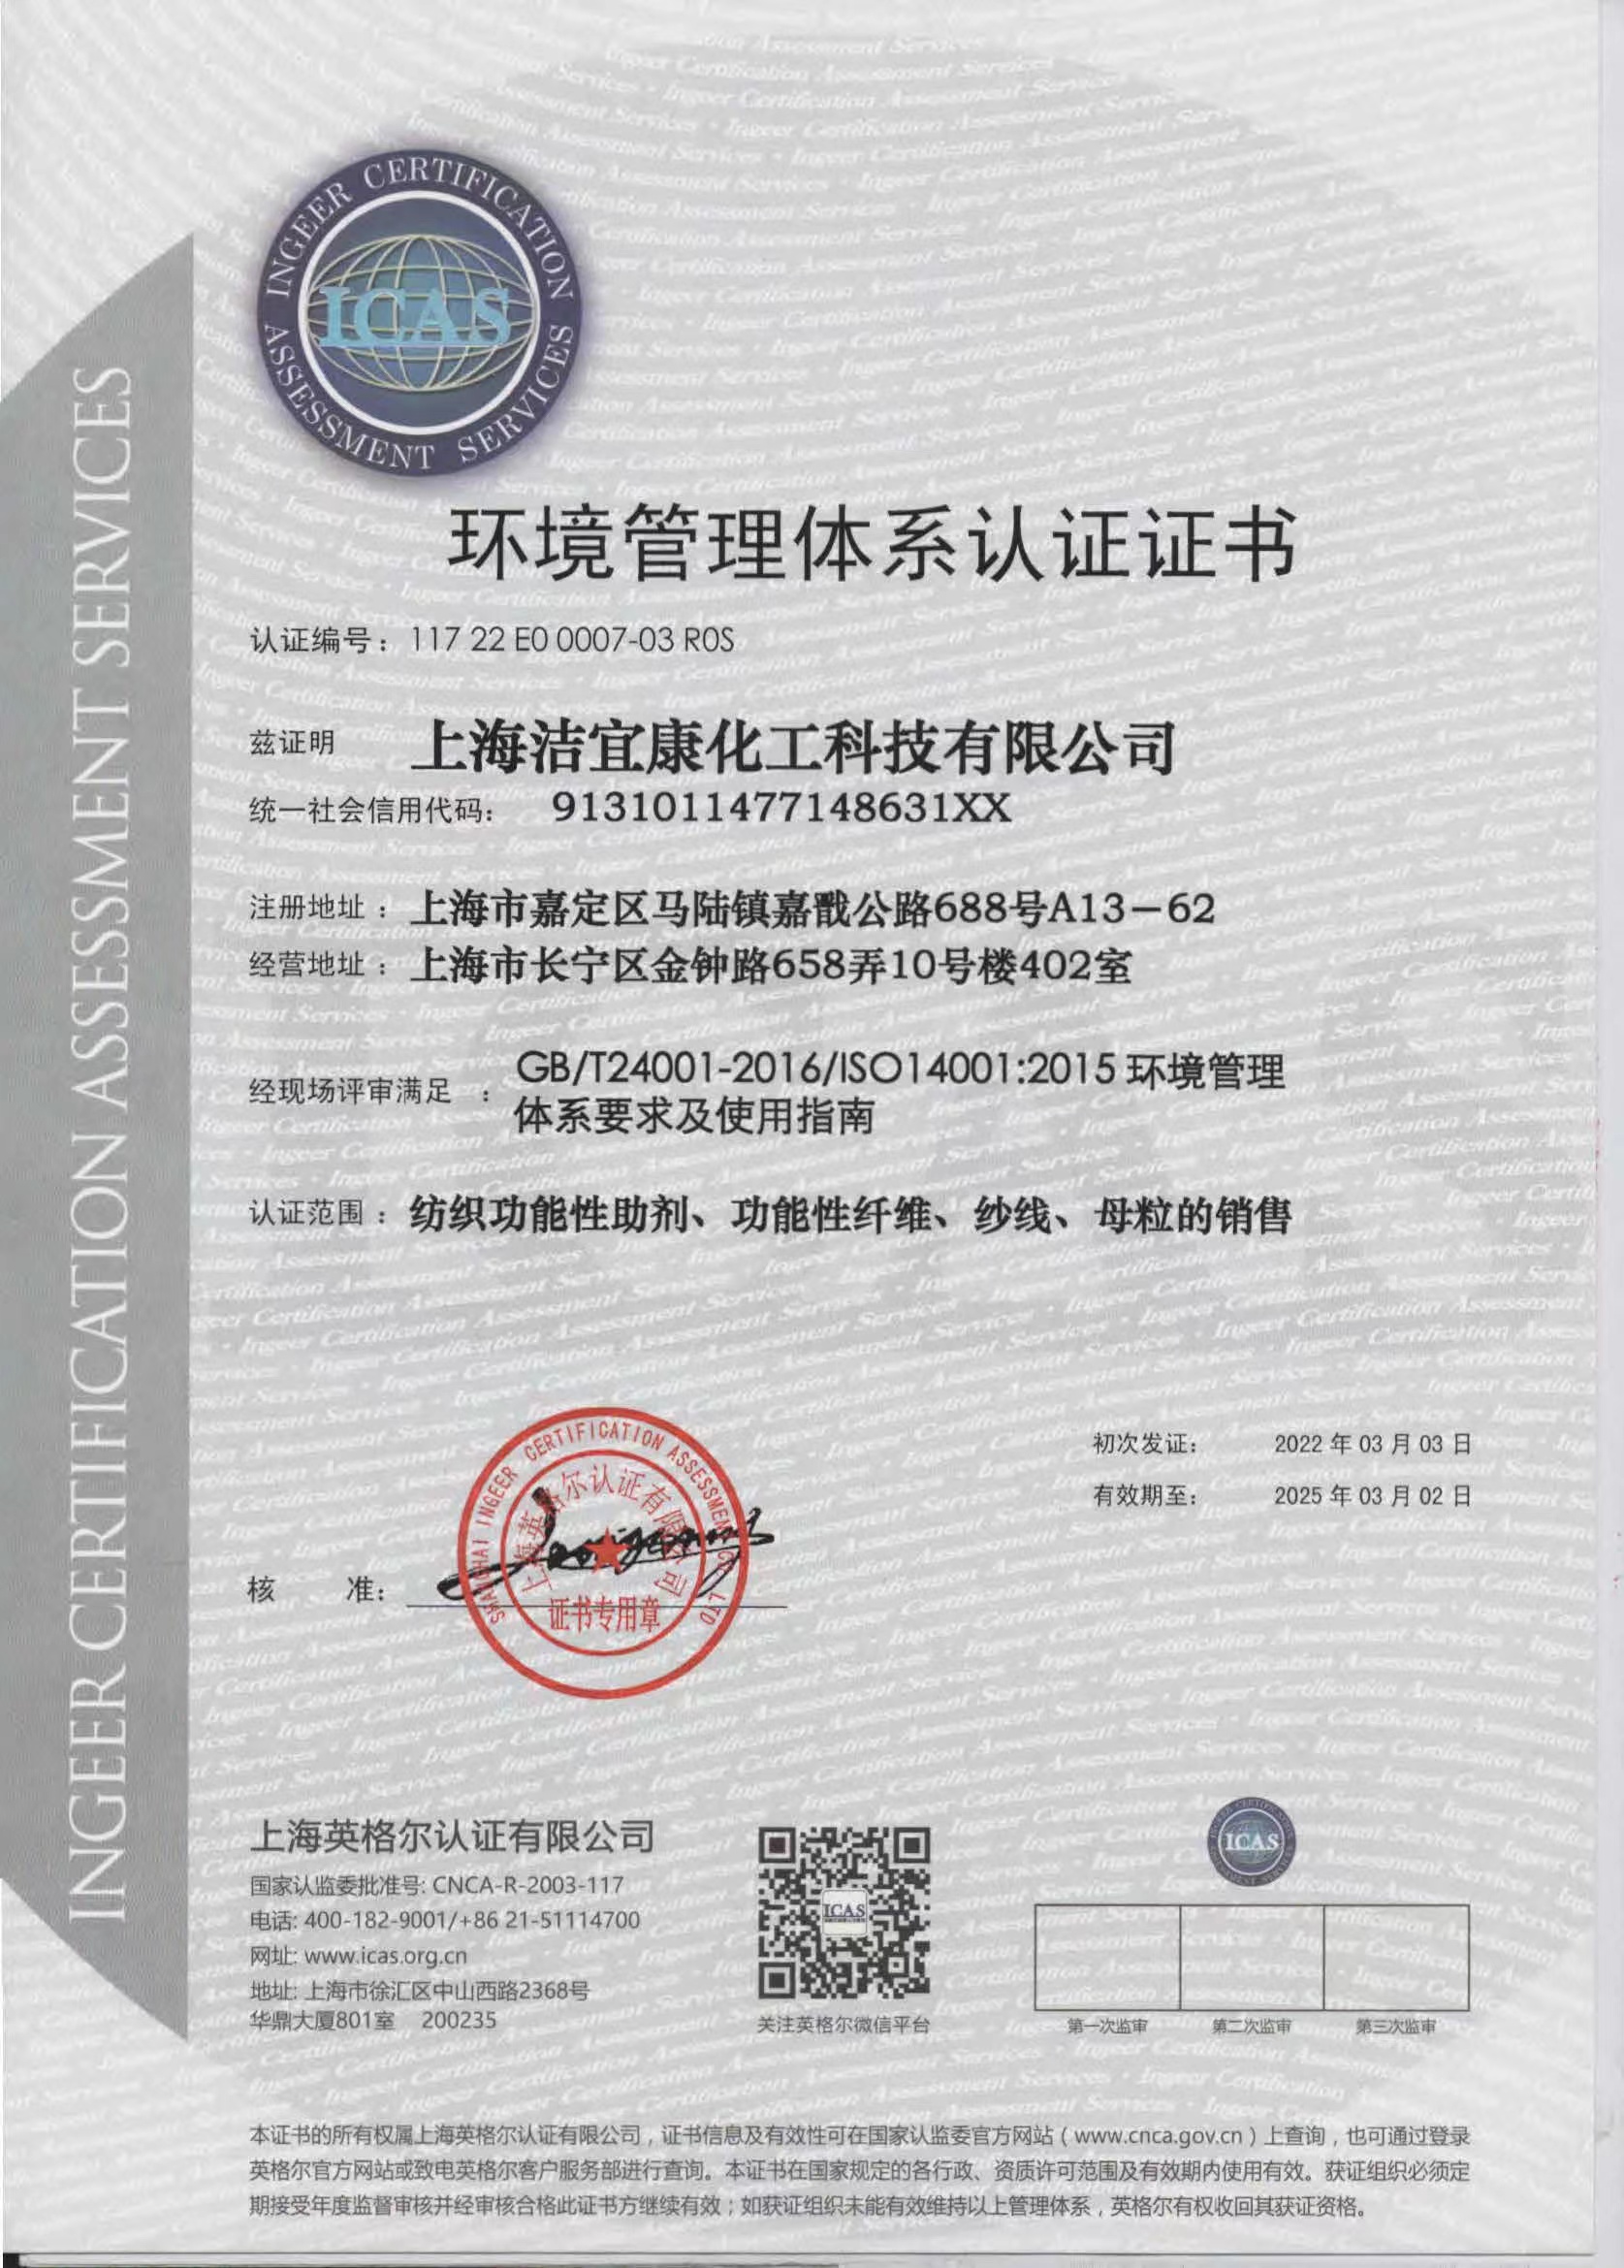 Environmental management system Certificate in Chinese